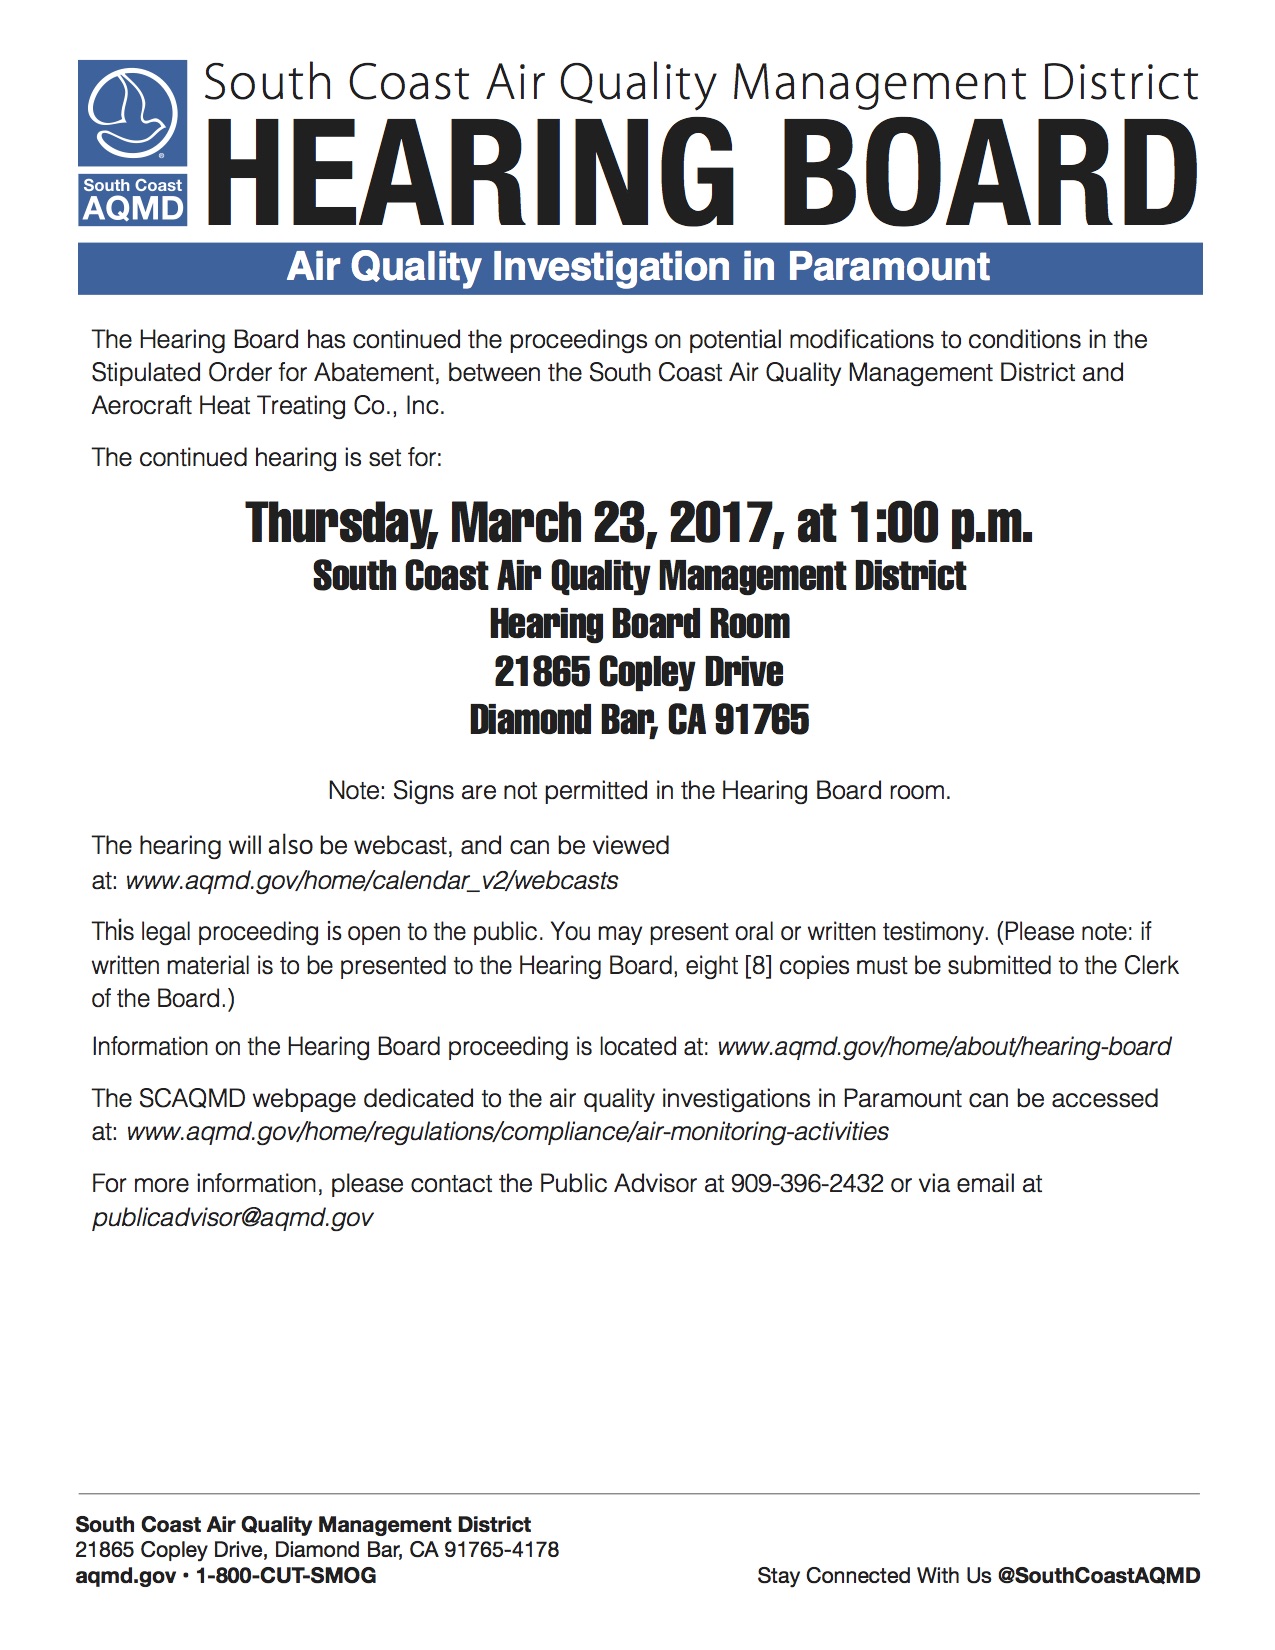 SCAQMD Flyer for Aerocraft Continued Hearing